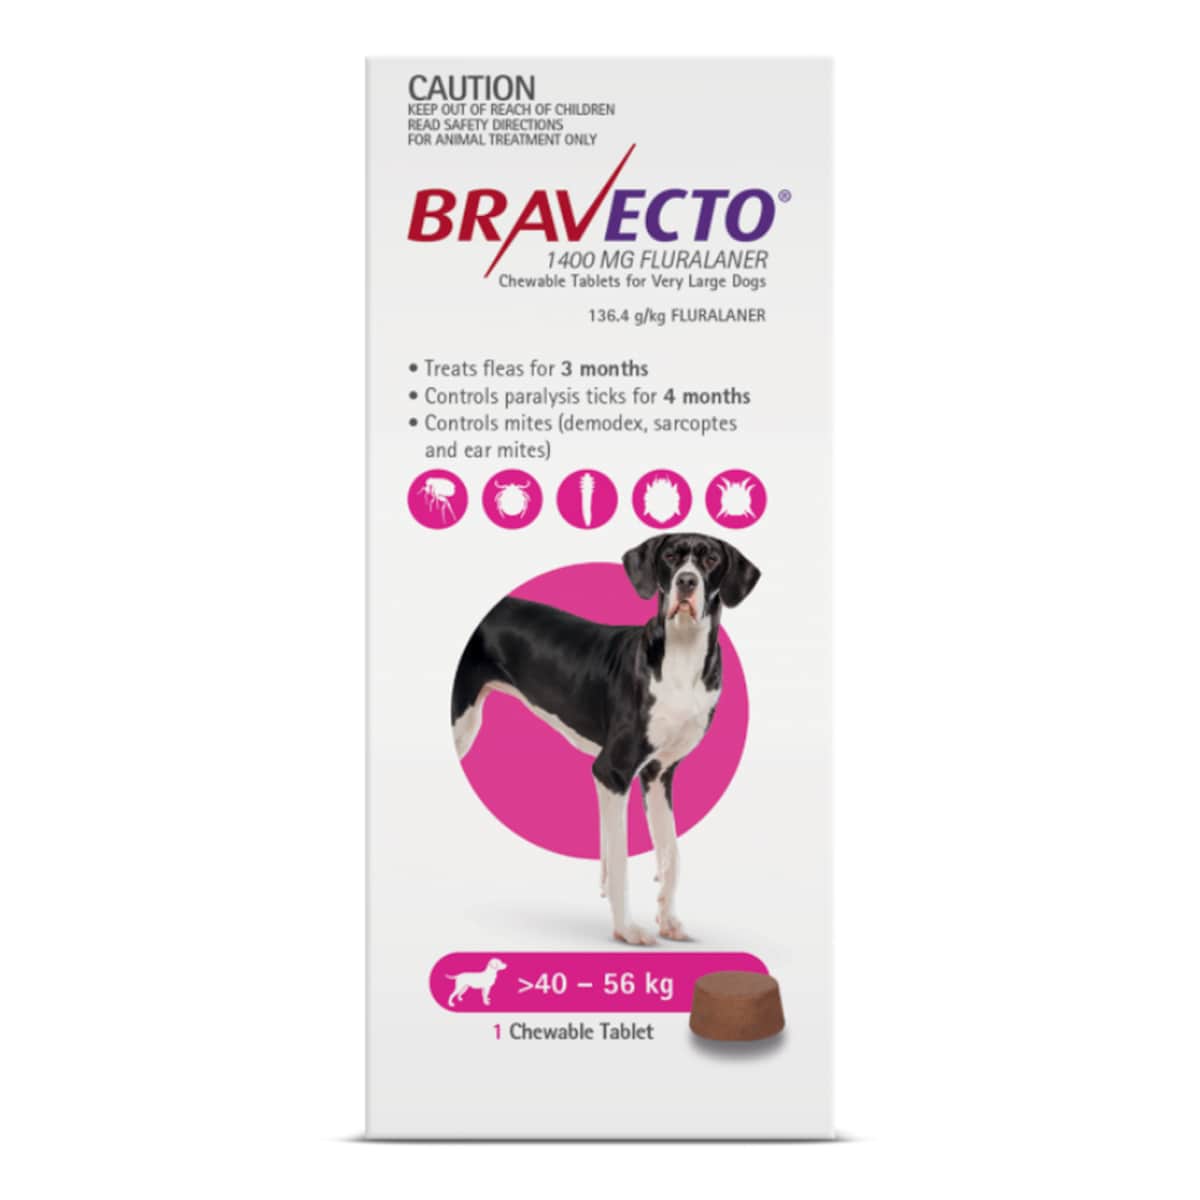 Bravecto For Very Large Dogs 40Kg - 56Kg 1 Chewable Tablet